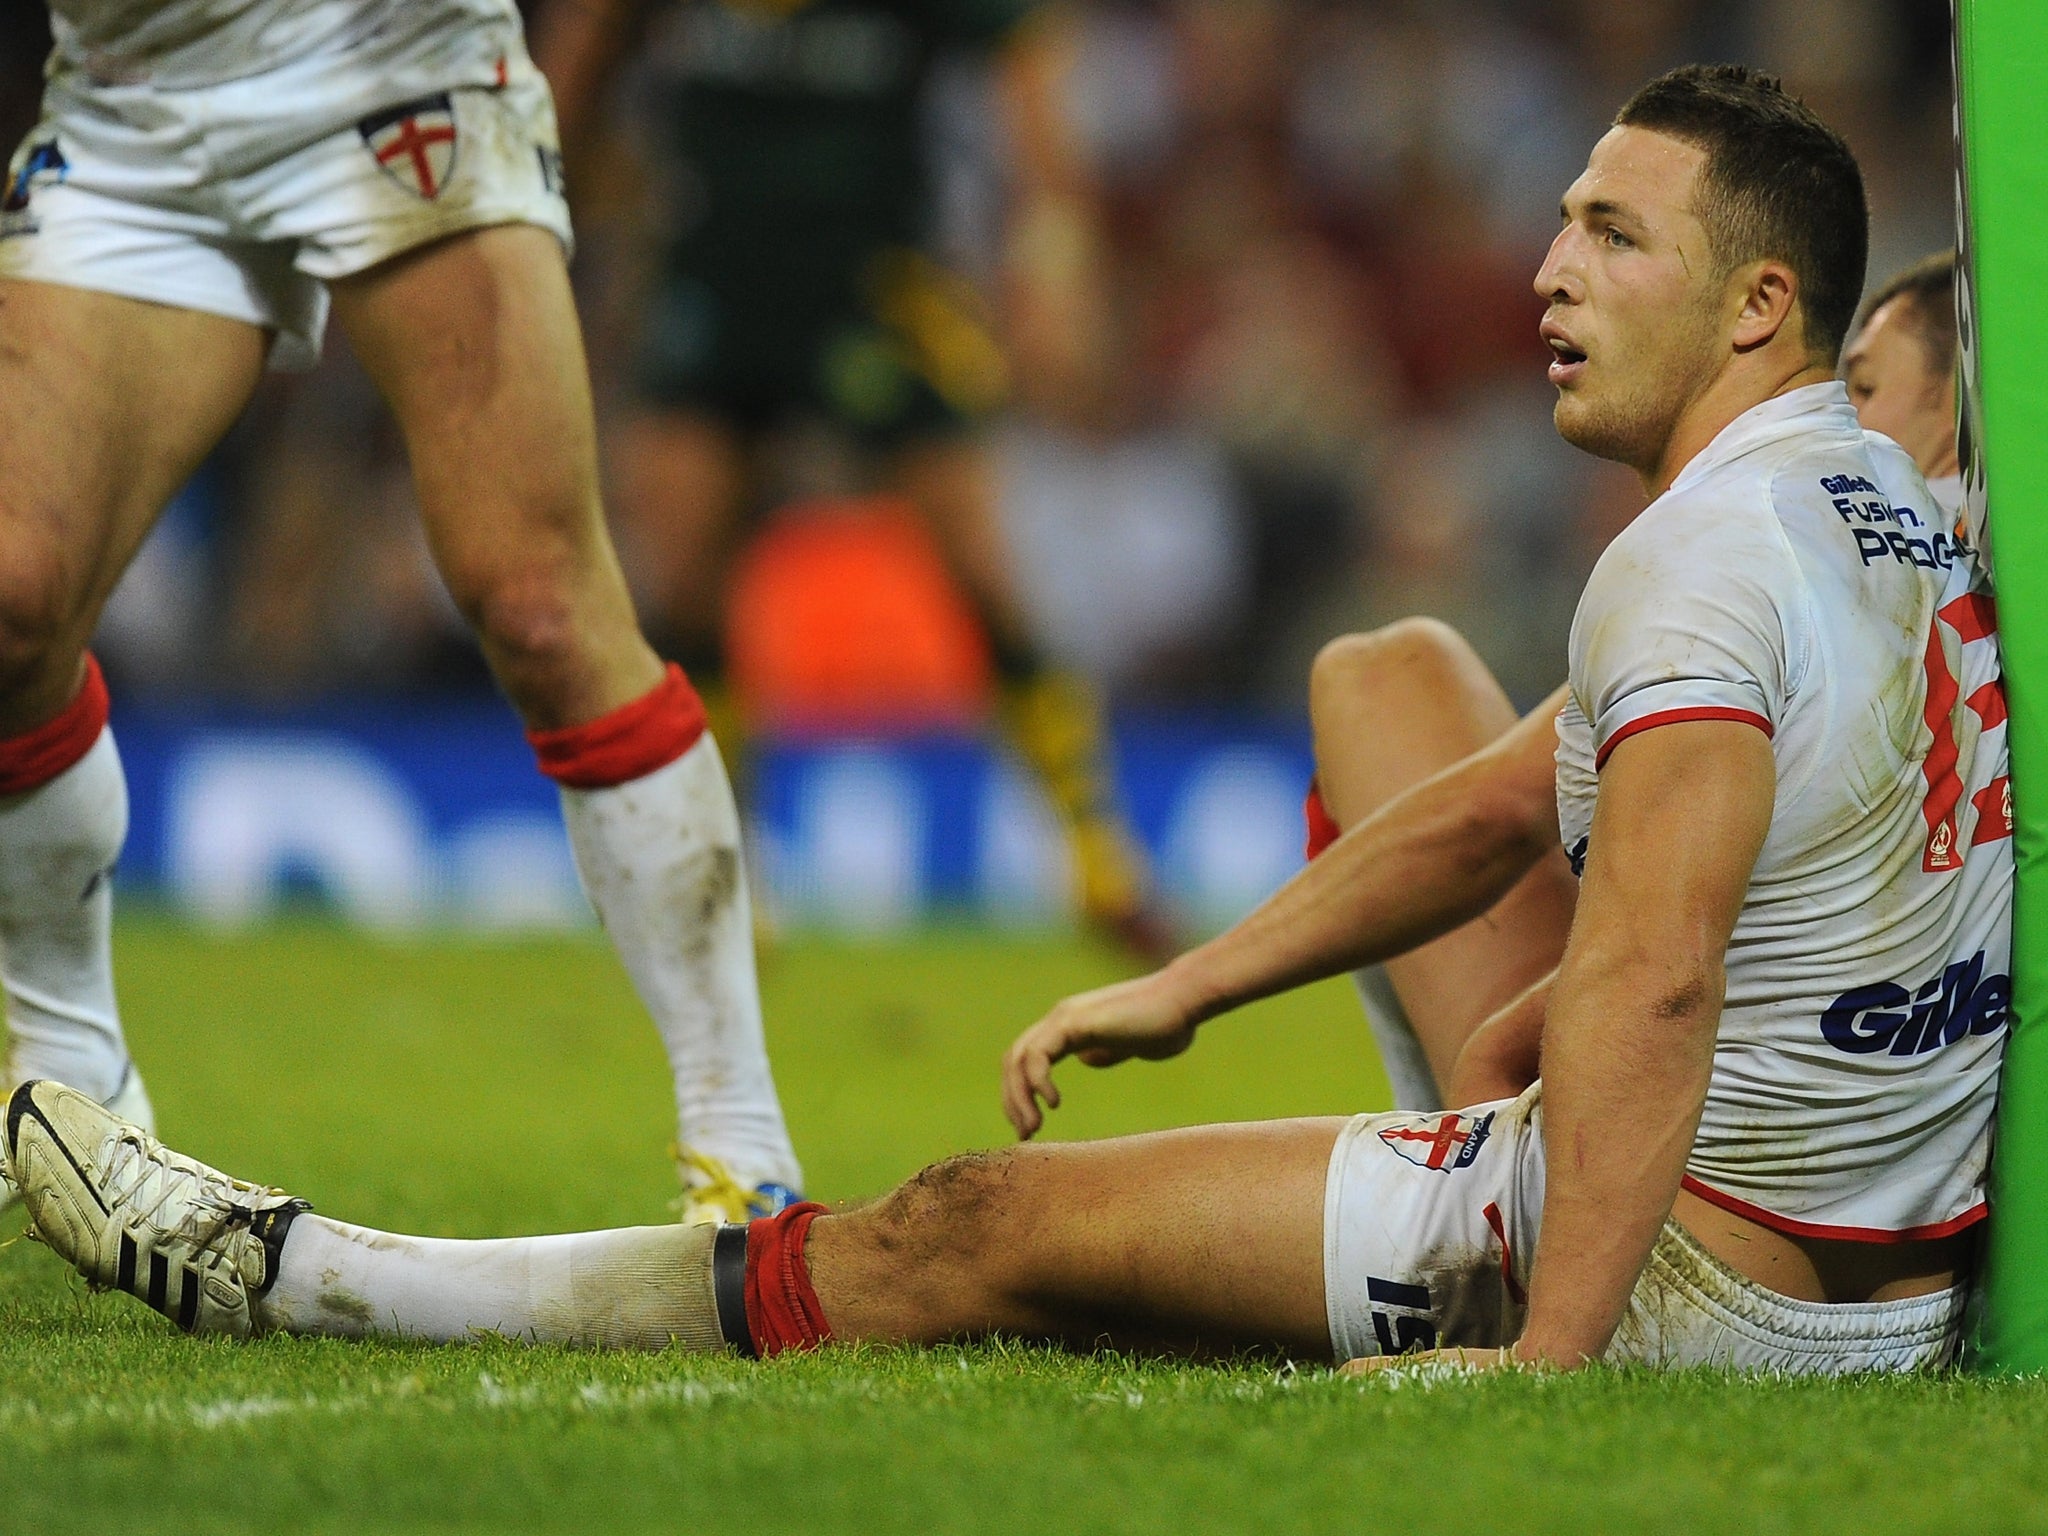 England will be without Sam Burgess for their World Cup match against Ireland after he was given a one-match ban for a high tackle on Australia's Sam Thaiday